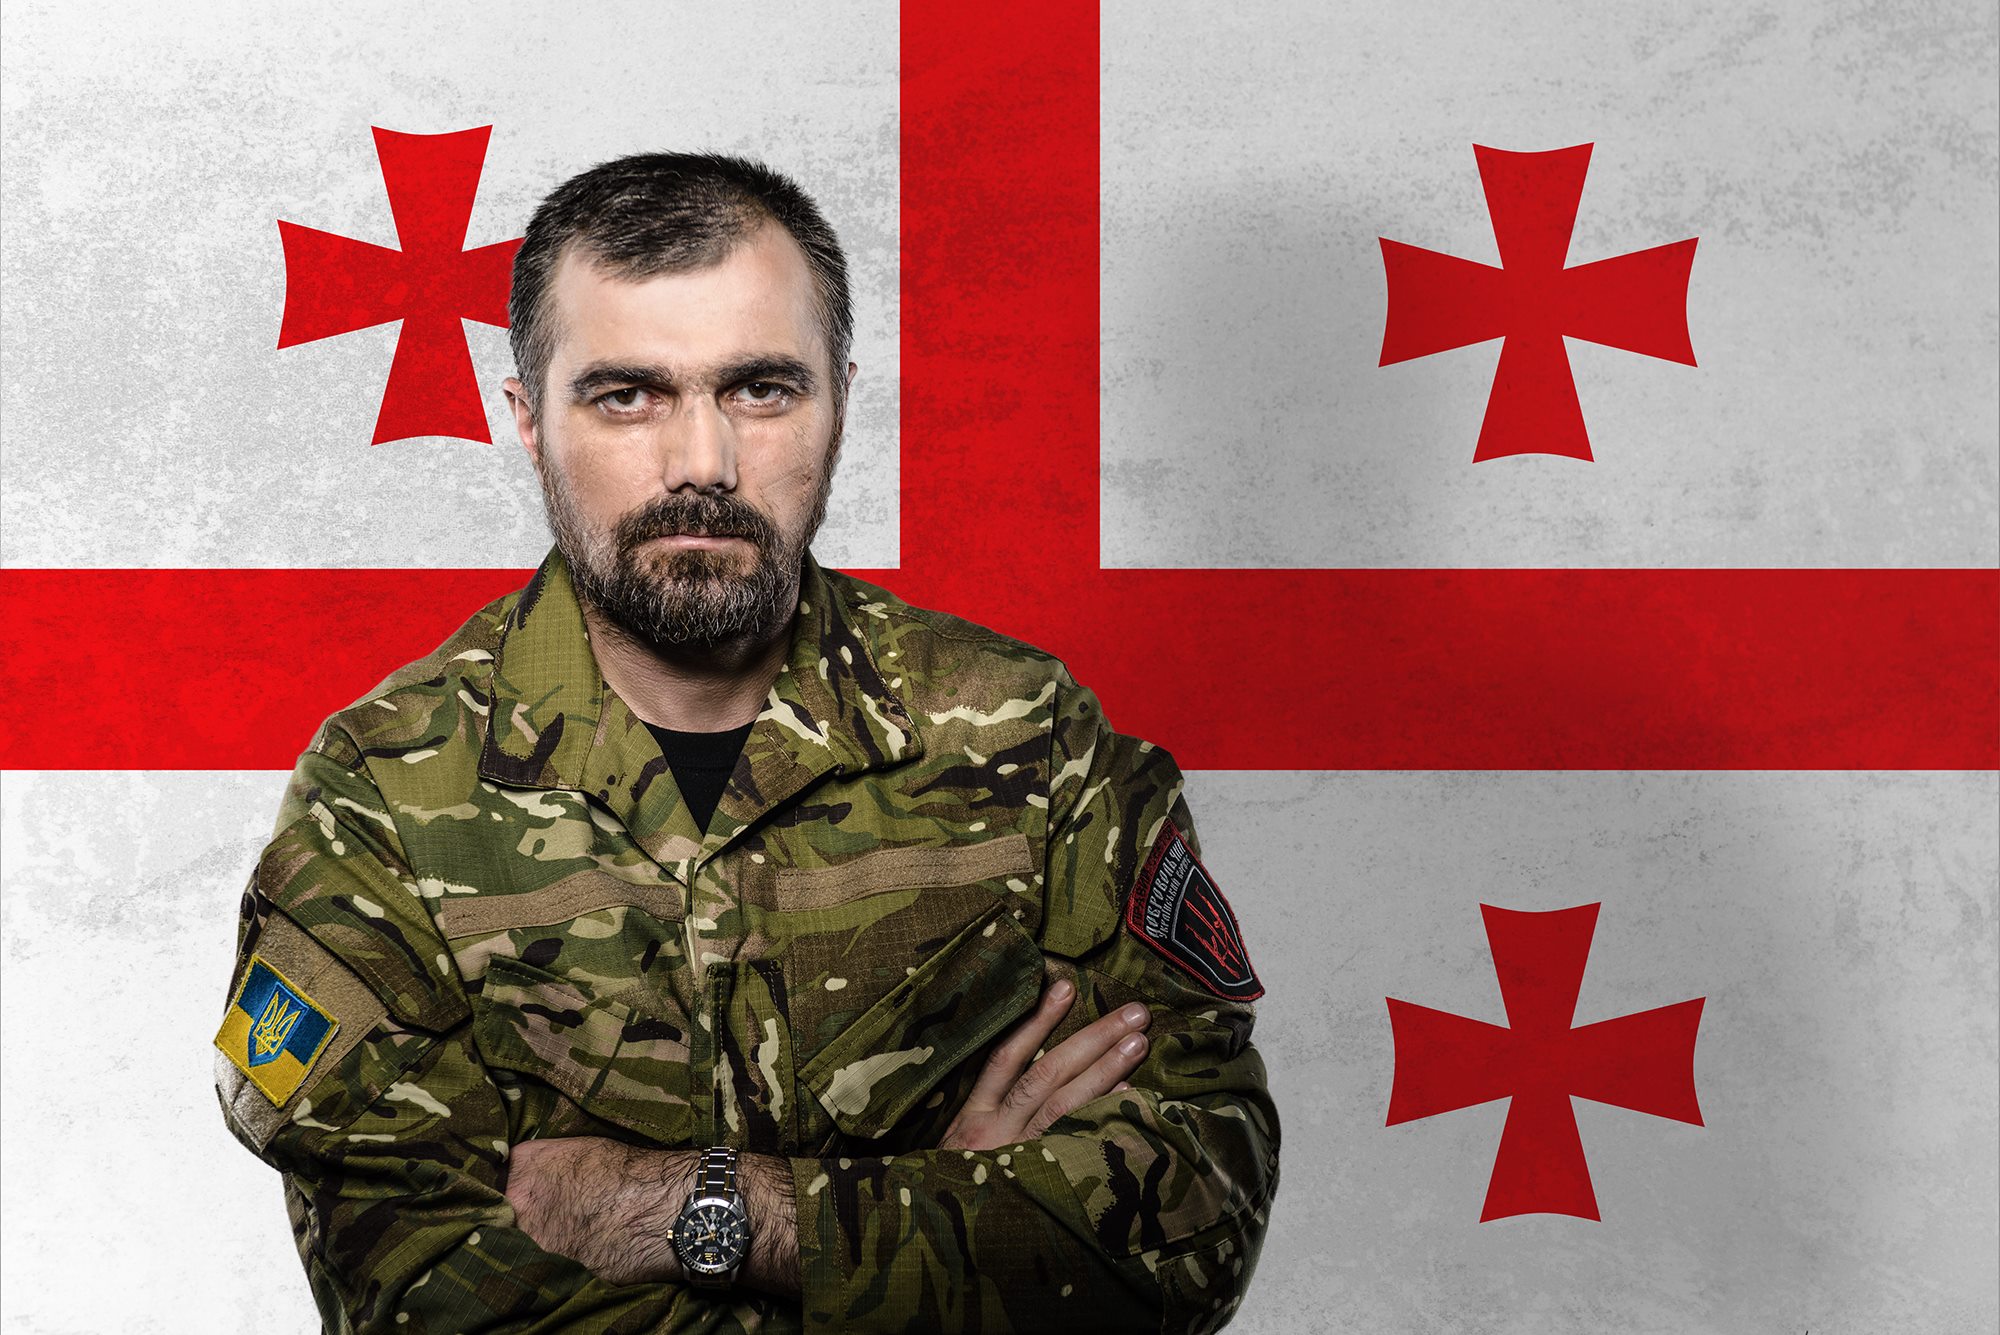 “I came to love Ukraine.” How Levan from Georgia trains soldiers of the Right Sector